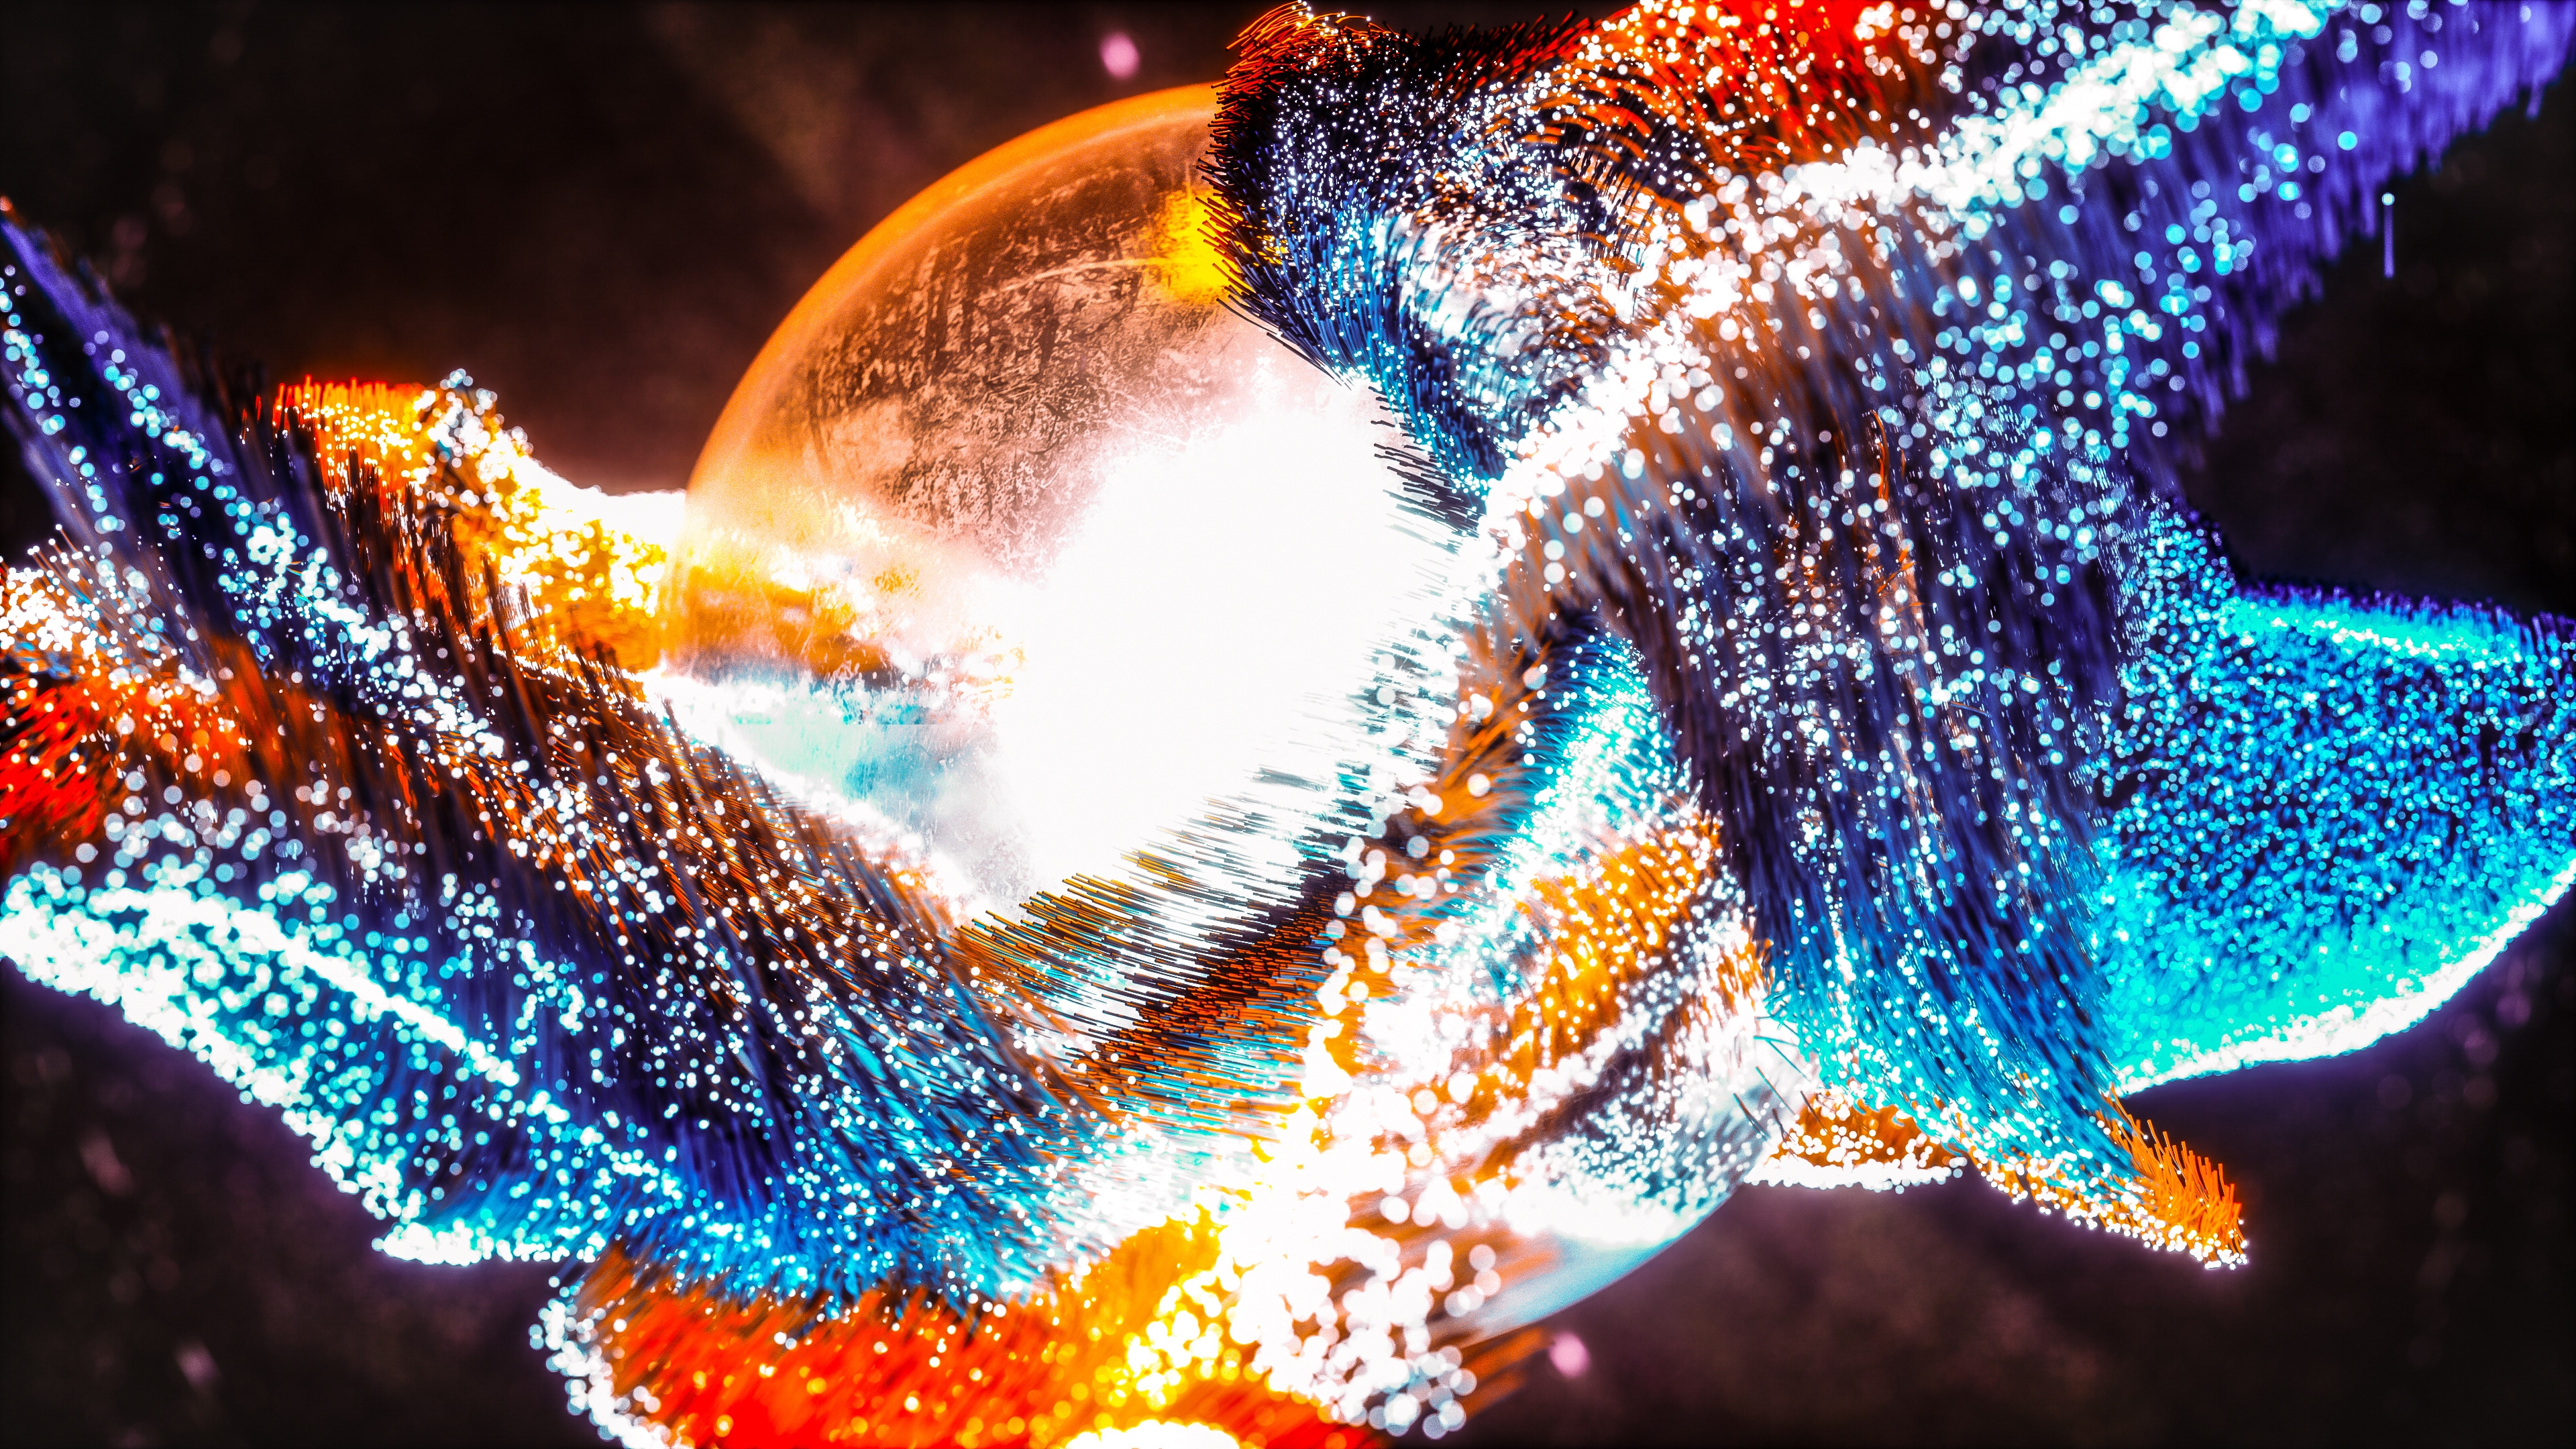 HD wallpaper, Colorful, Bright, Psychedelic, Particle Explosion, 3D